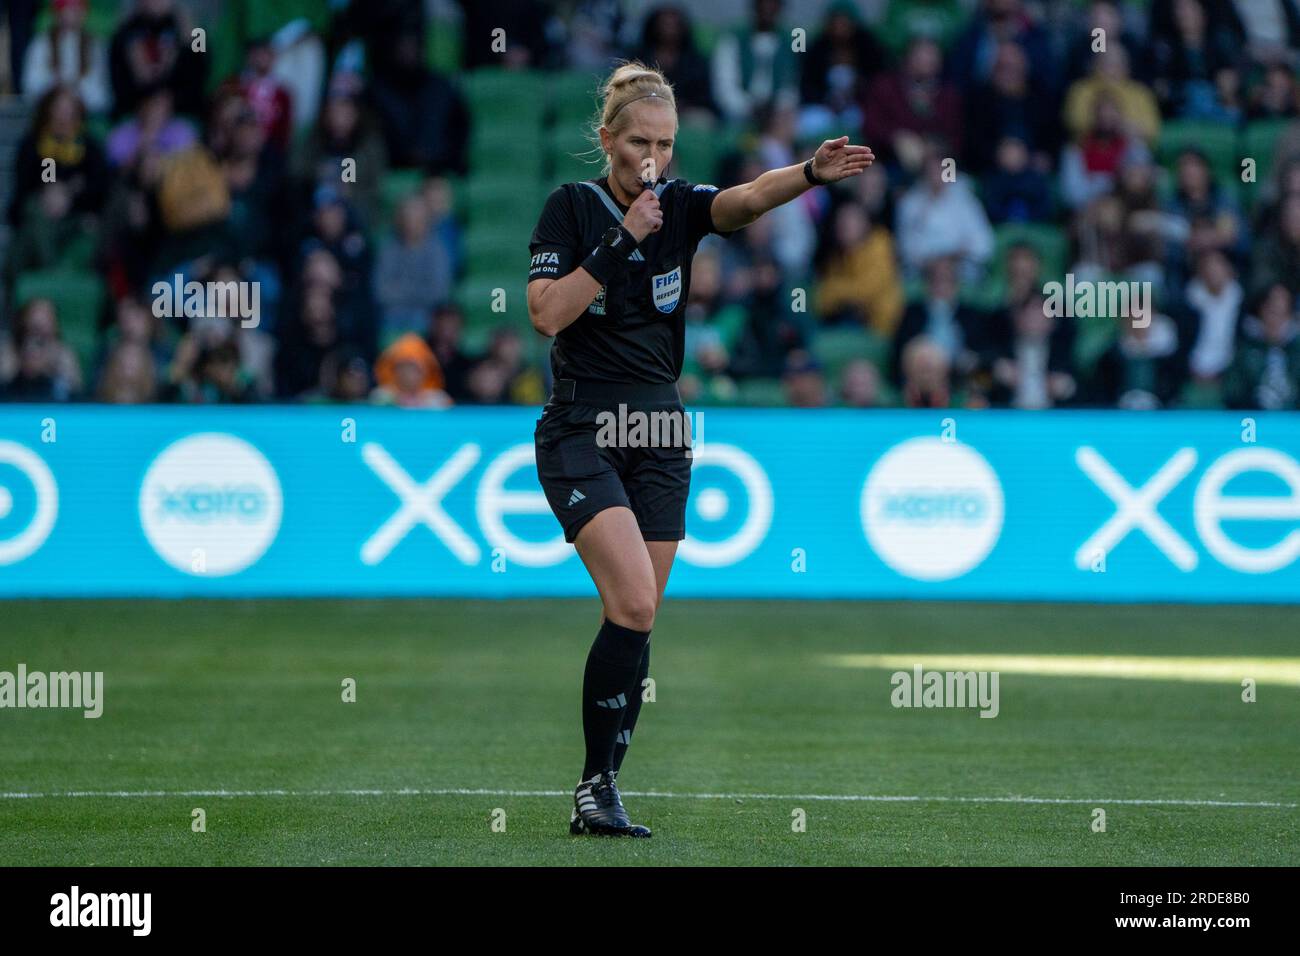 Melbourne, Australia. 21st July, 2023. Melbourne, Australia, July 21st 2023: Referee Lina Lehtovaara signals a penalty during the 2023 FIFA Womens World Cup football match between Nigeria and Canada at Melbourne Rectangular Stadium in Melbourne, Australia. (Noe Llamas/SPP) Credit: SPP Sport Press Photo. /Alamy Live News Stock Photo